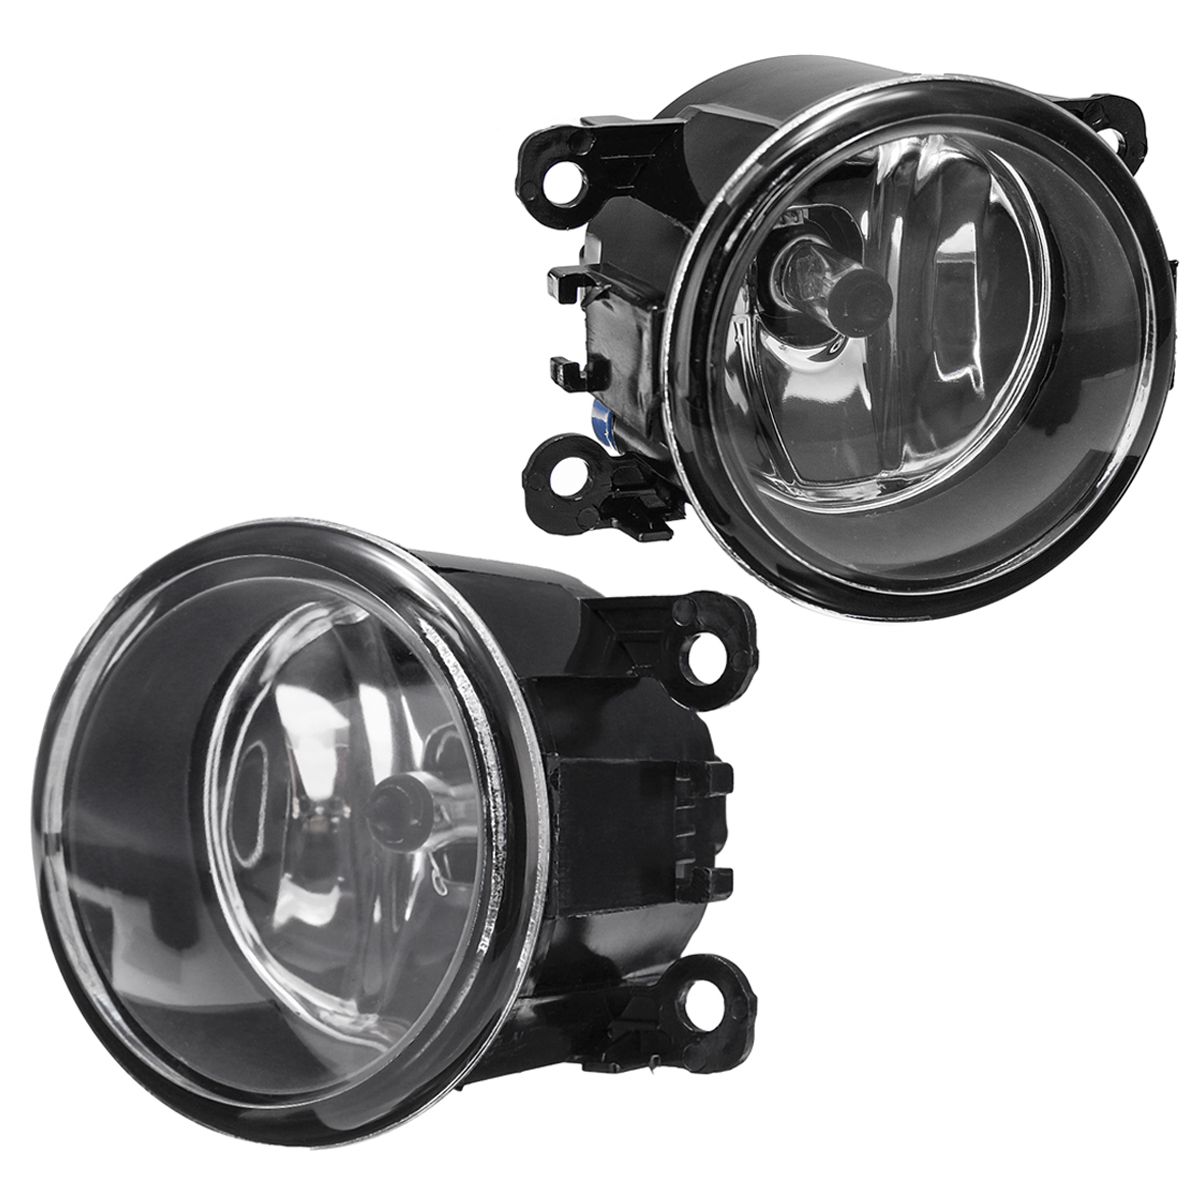 Pair-Car-Front-Bumper-Fog-Lights-with-Covers-Lamps-Wiring-Harness-for-Ford-Focus-2012-2014-1348593